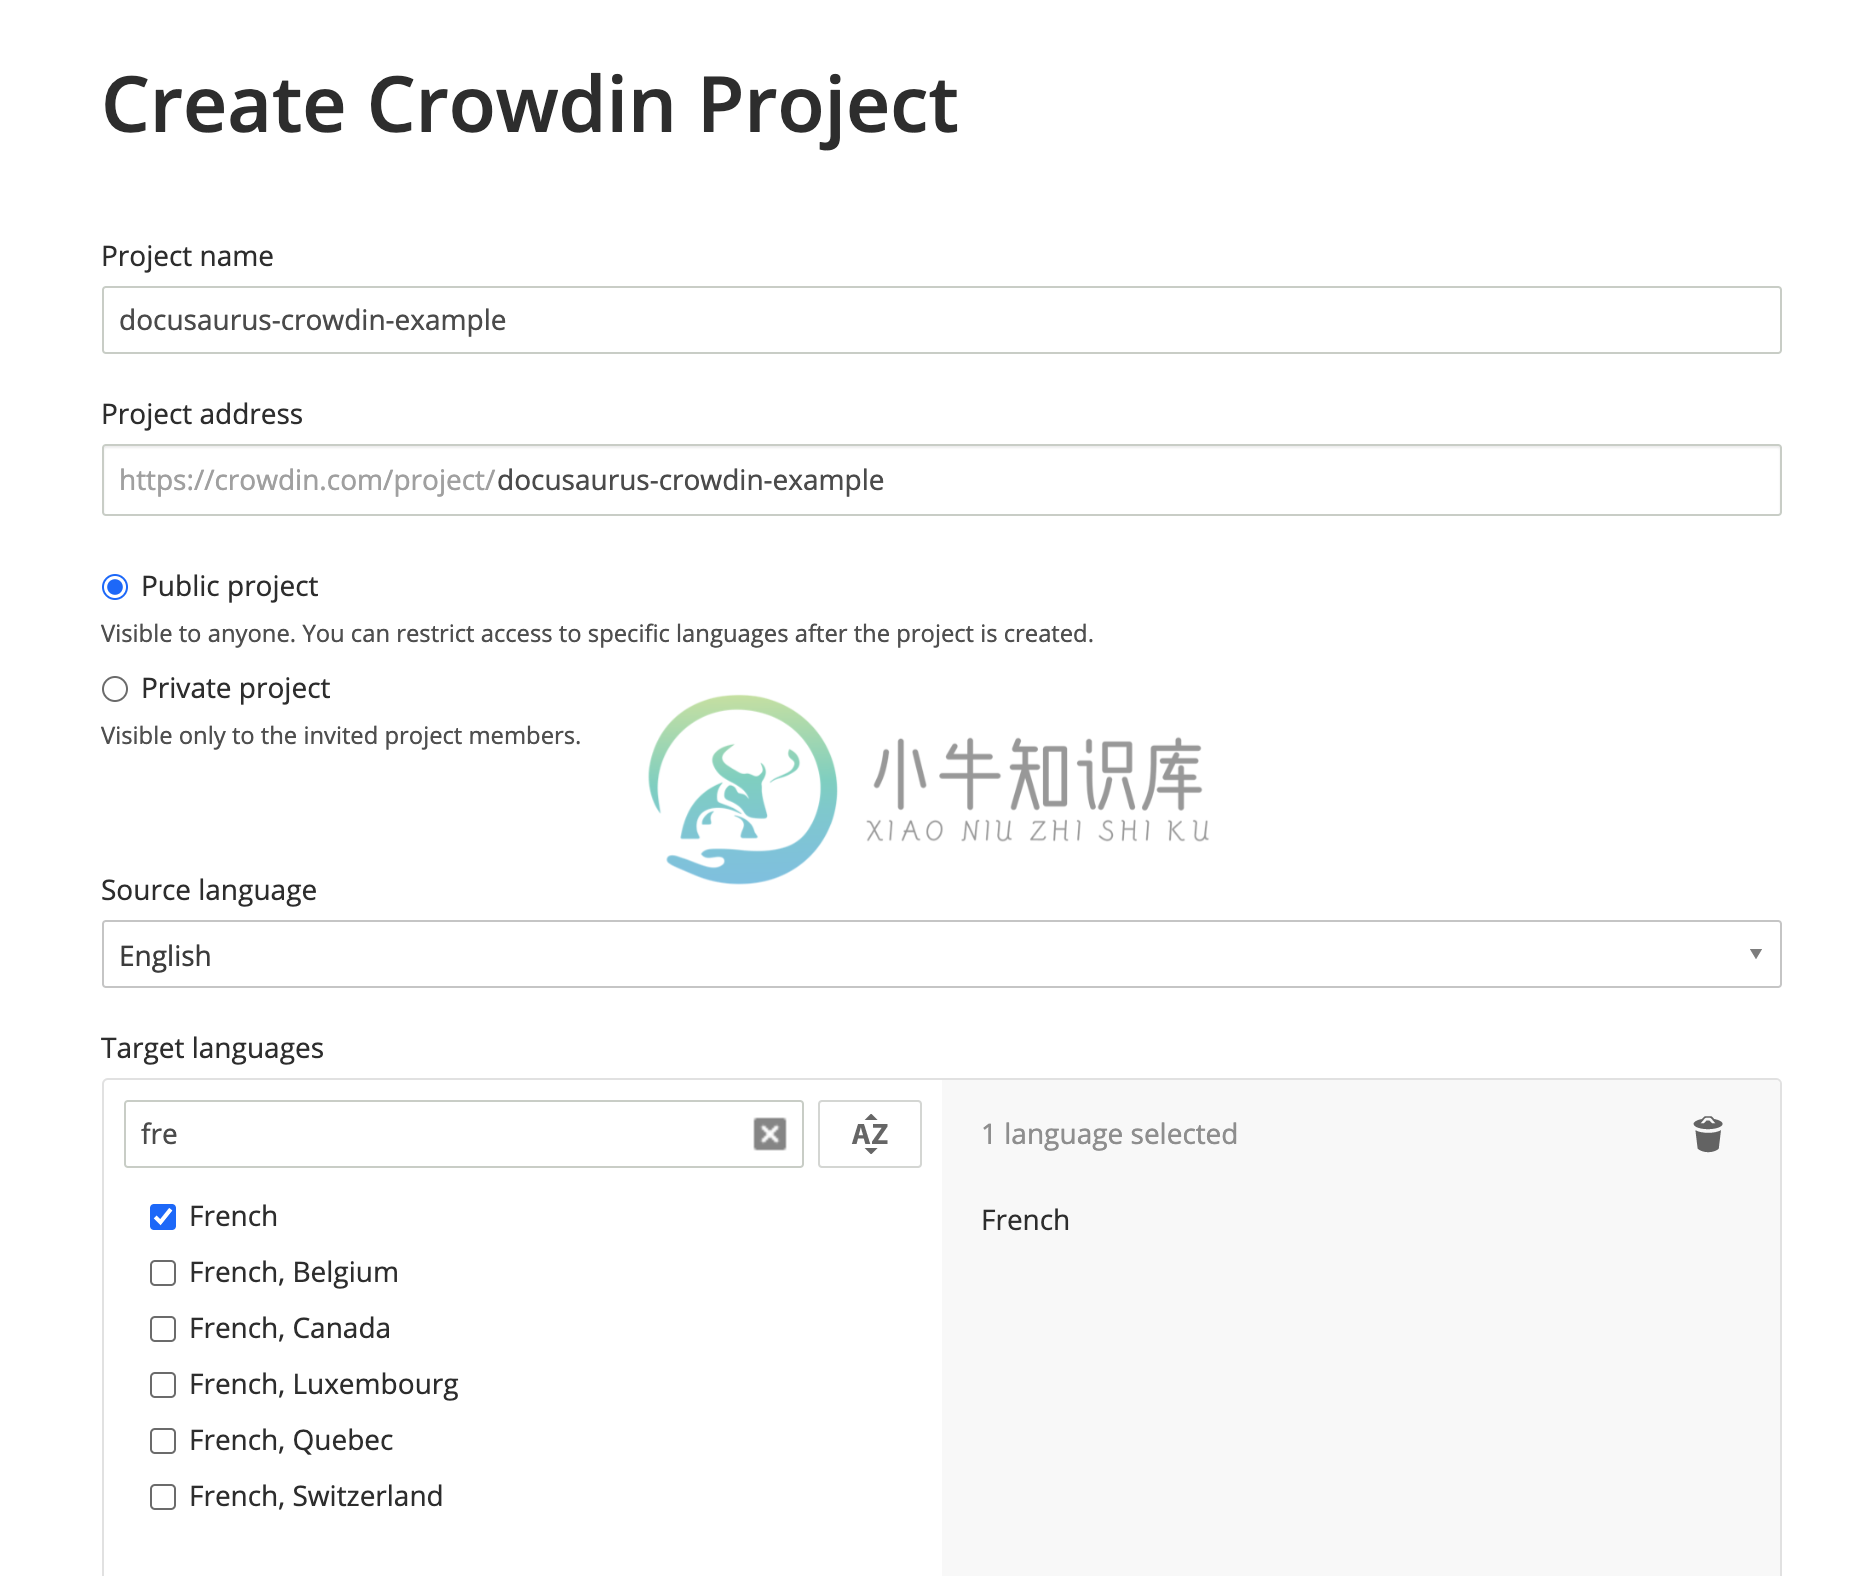 Create a Crowdin project with english as source language, and french as target language